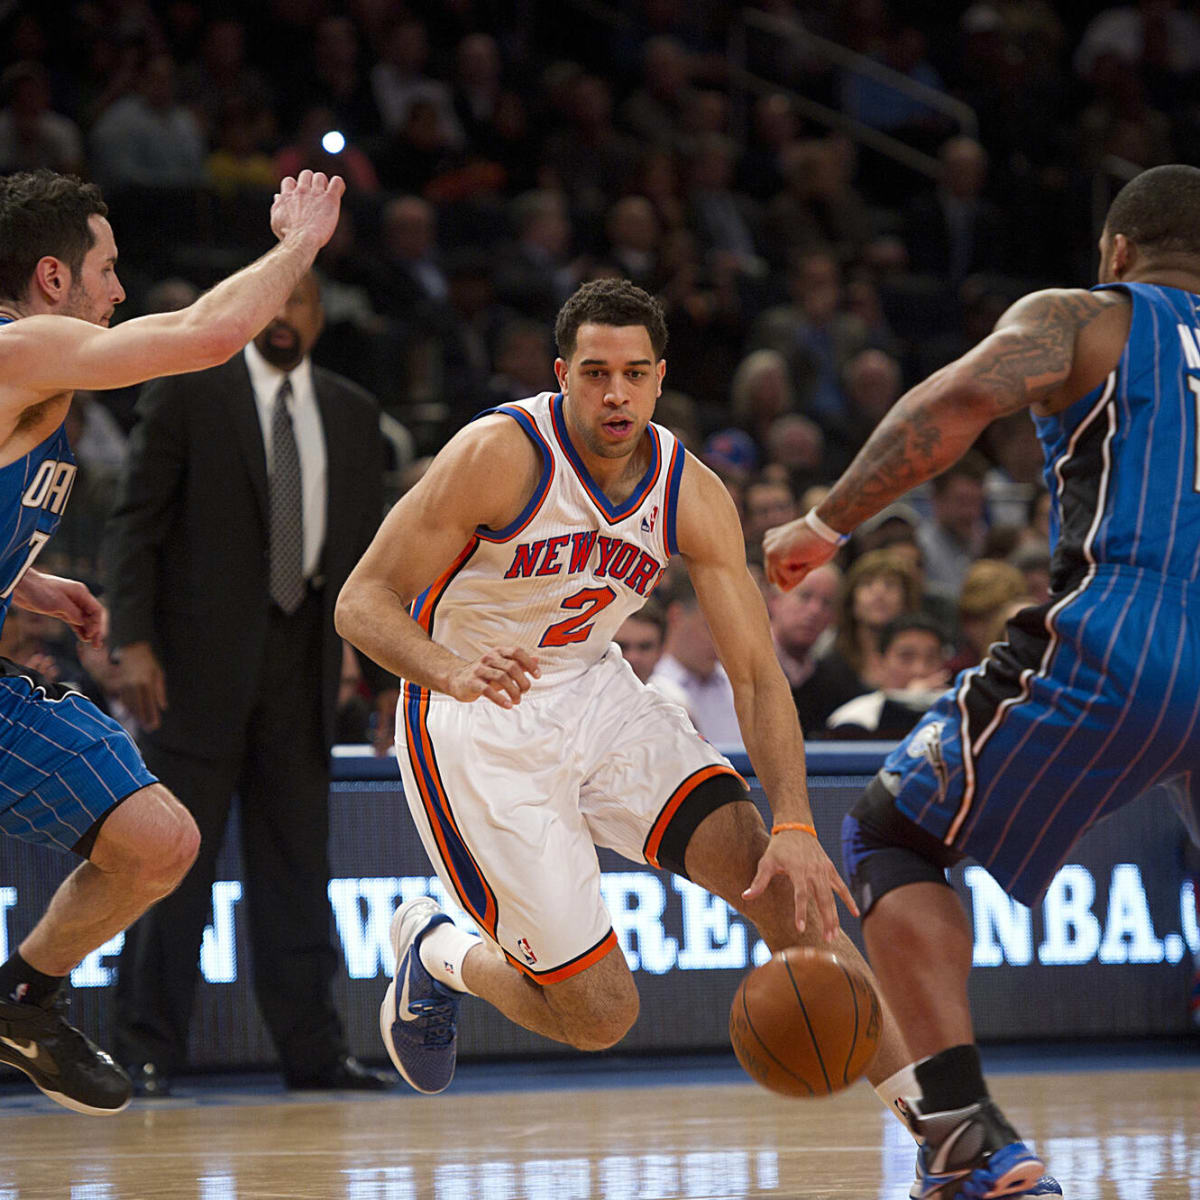 DraftExpress - Landry Fields: The Players You See. The Players I Play